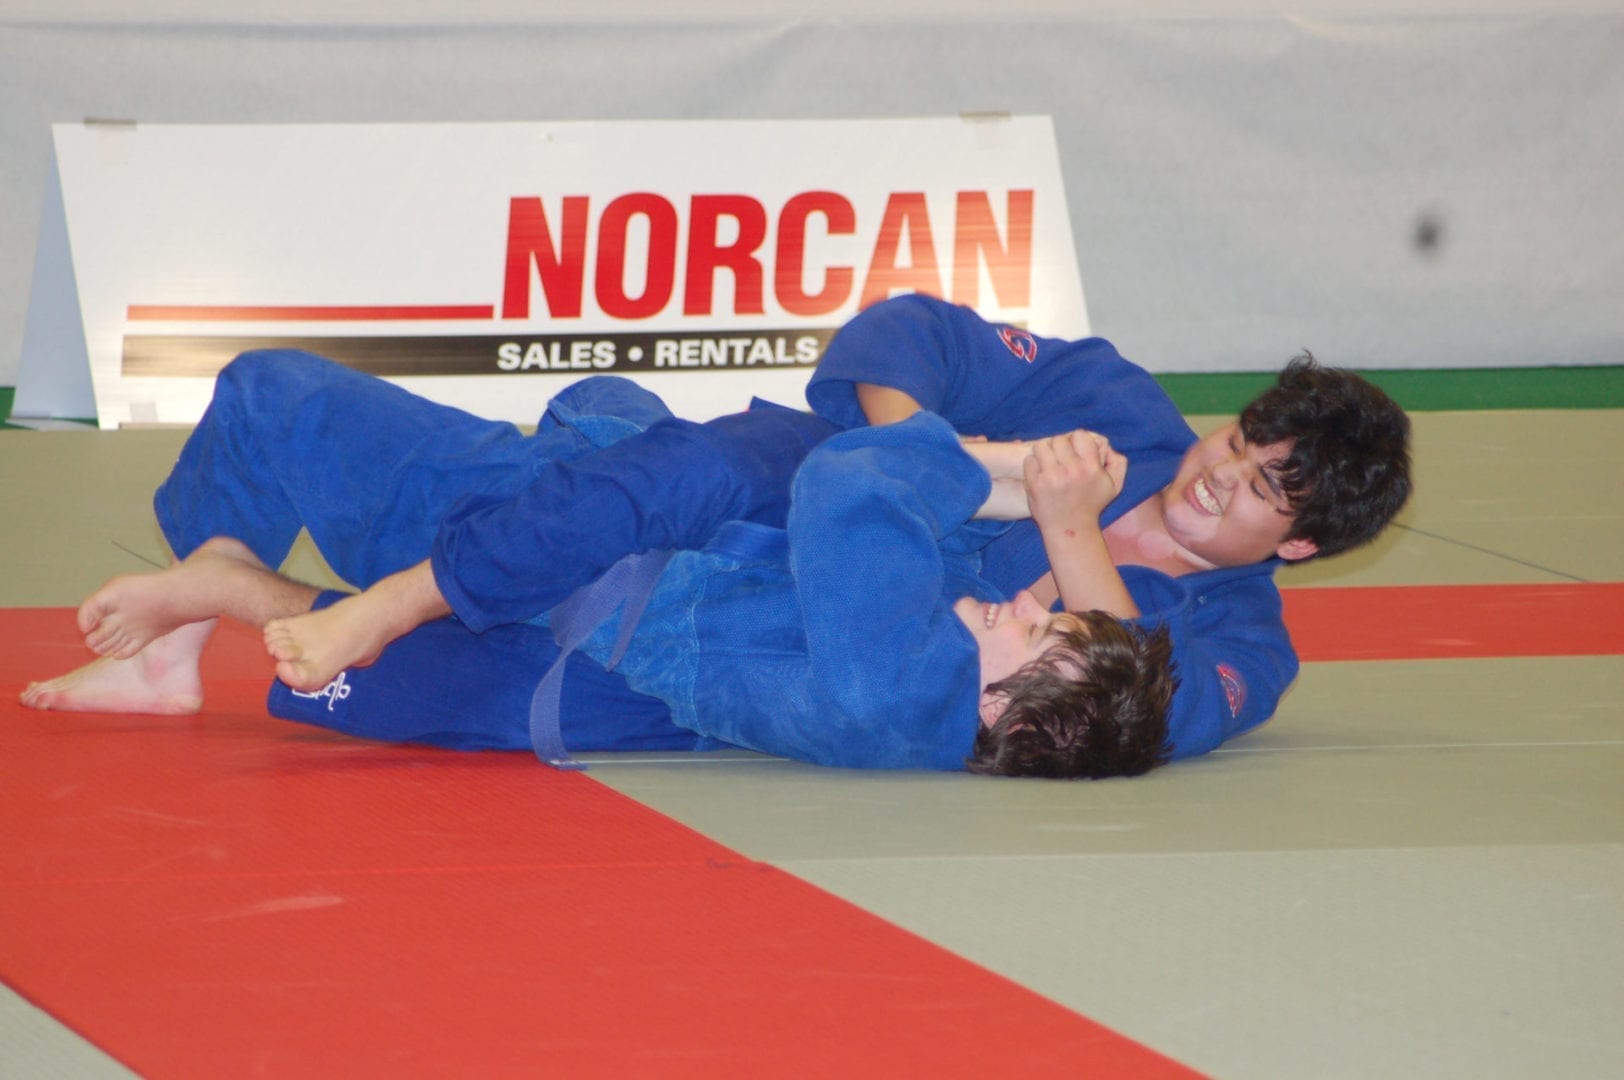 Iqaluit's Eugene Dederick, top, practices nee-waza (ground grappling) with Zachary Green at the 2007 Canada Winter Games in Whitehorse. Dederick won bronze in his weight category, the first medal for Nunavut ever at the Canada Winter Games or Canada Summer Games. NNSL file photo